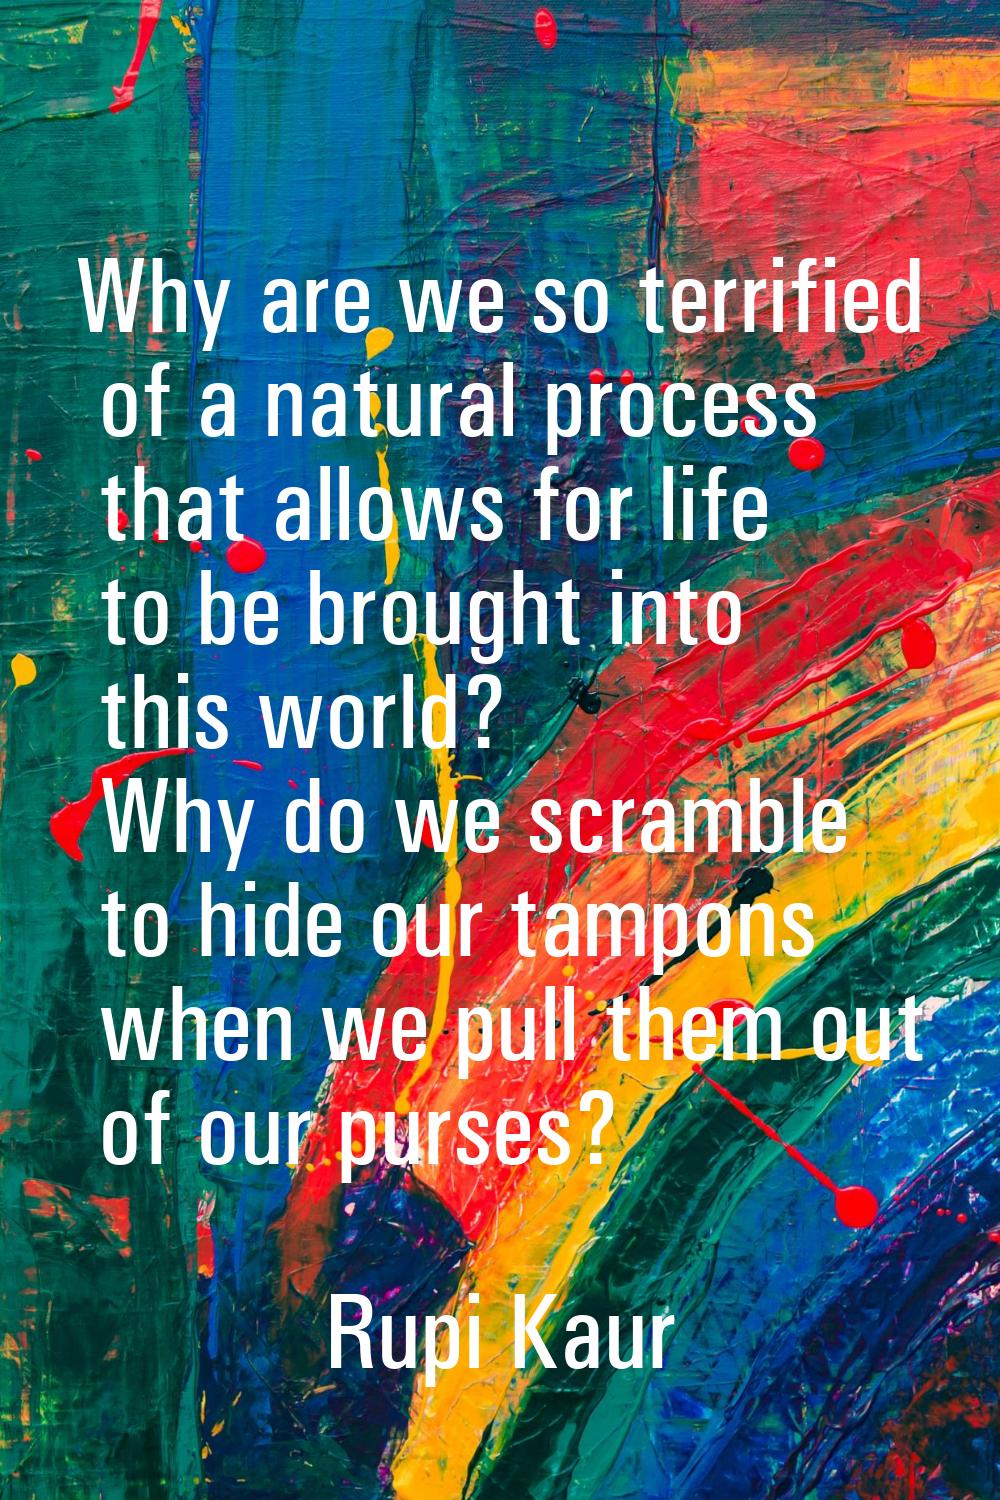 Why are we so terrified of a natural process that allows for life to be brought into this world? Wh